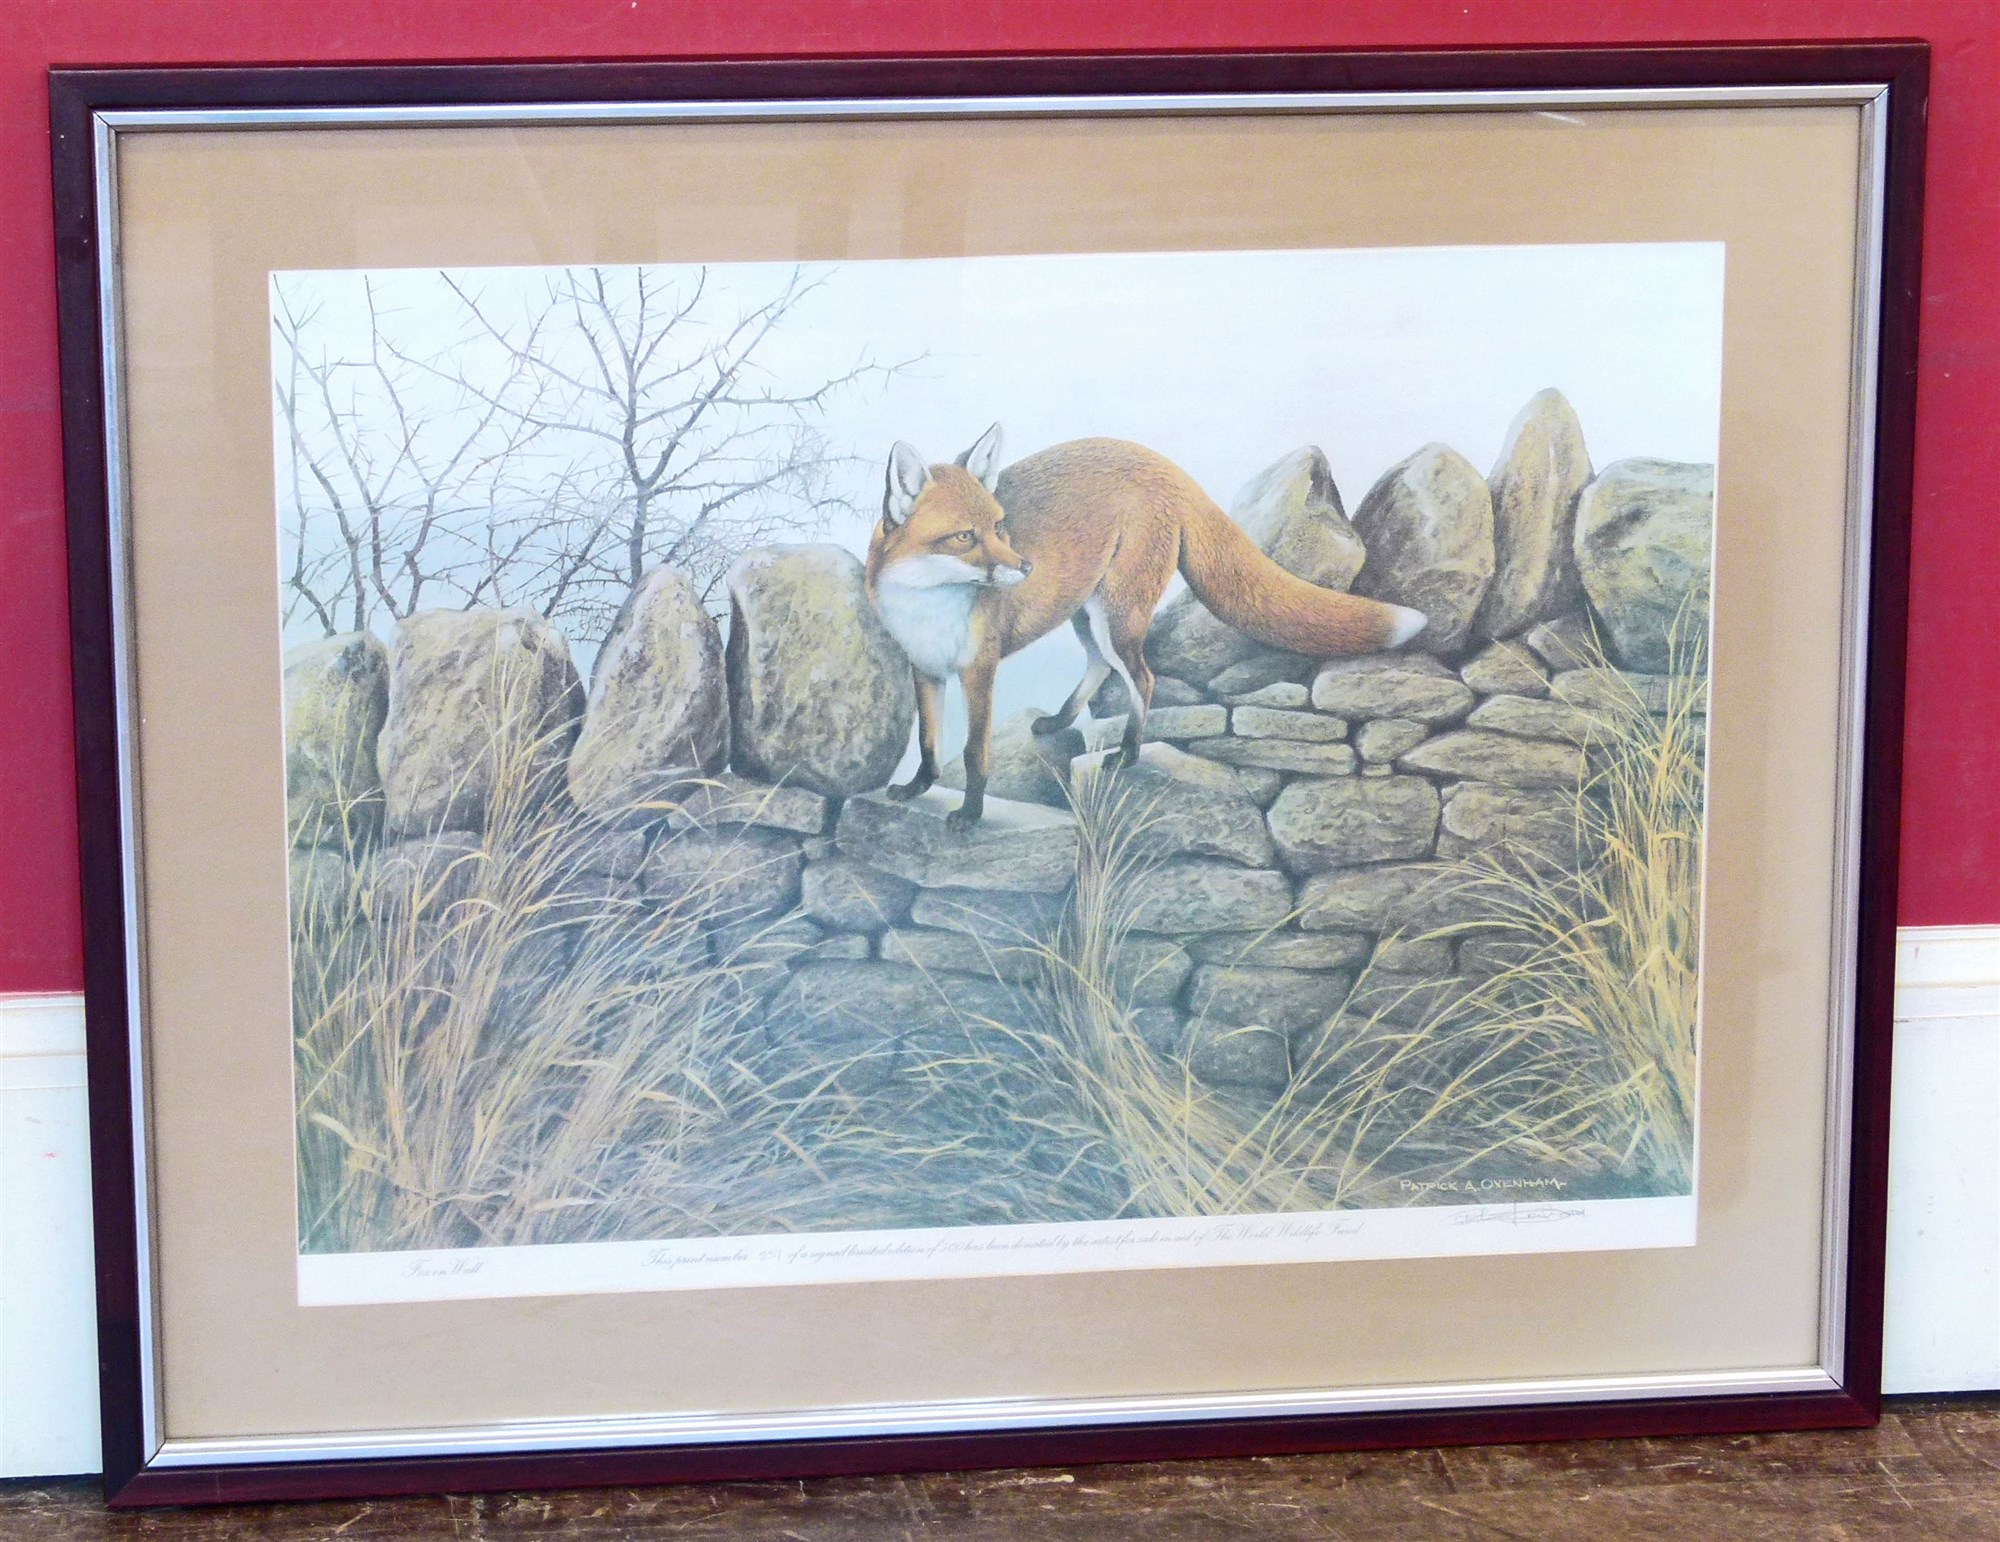 Signed limited edition print "Fox on Wall" after Patrick A. Oxenham. Unfortunately we are not